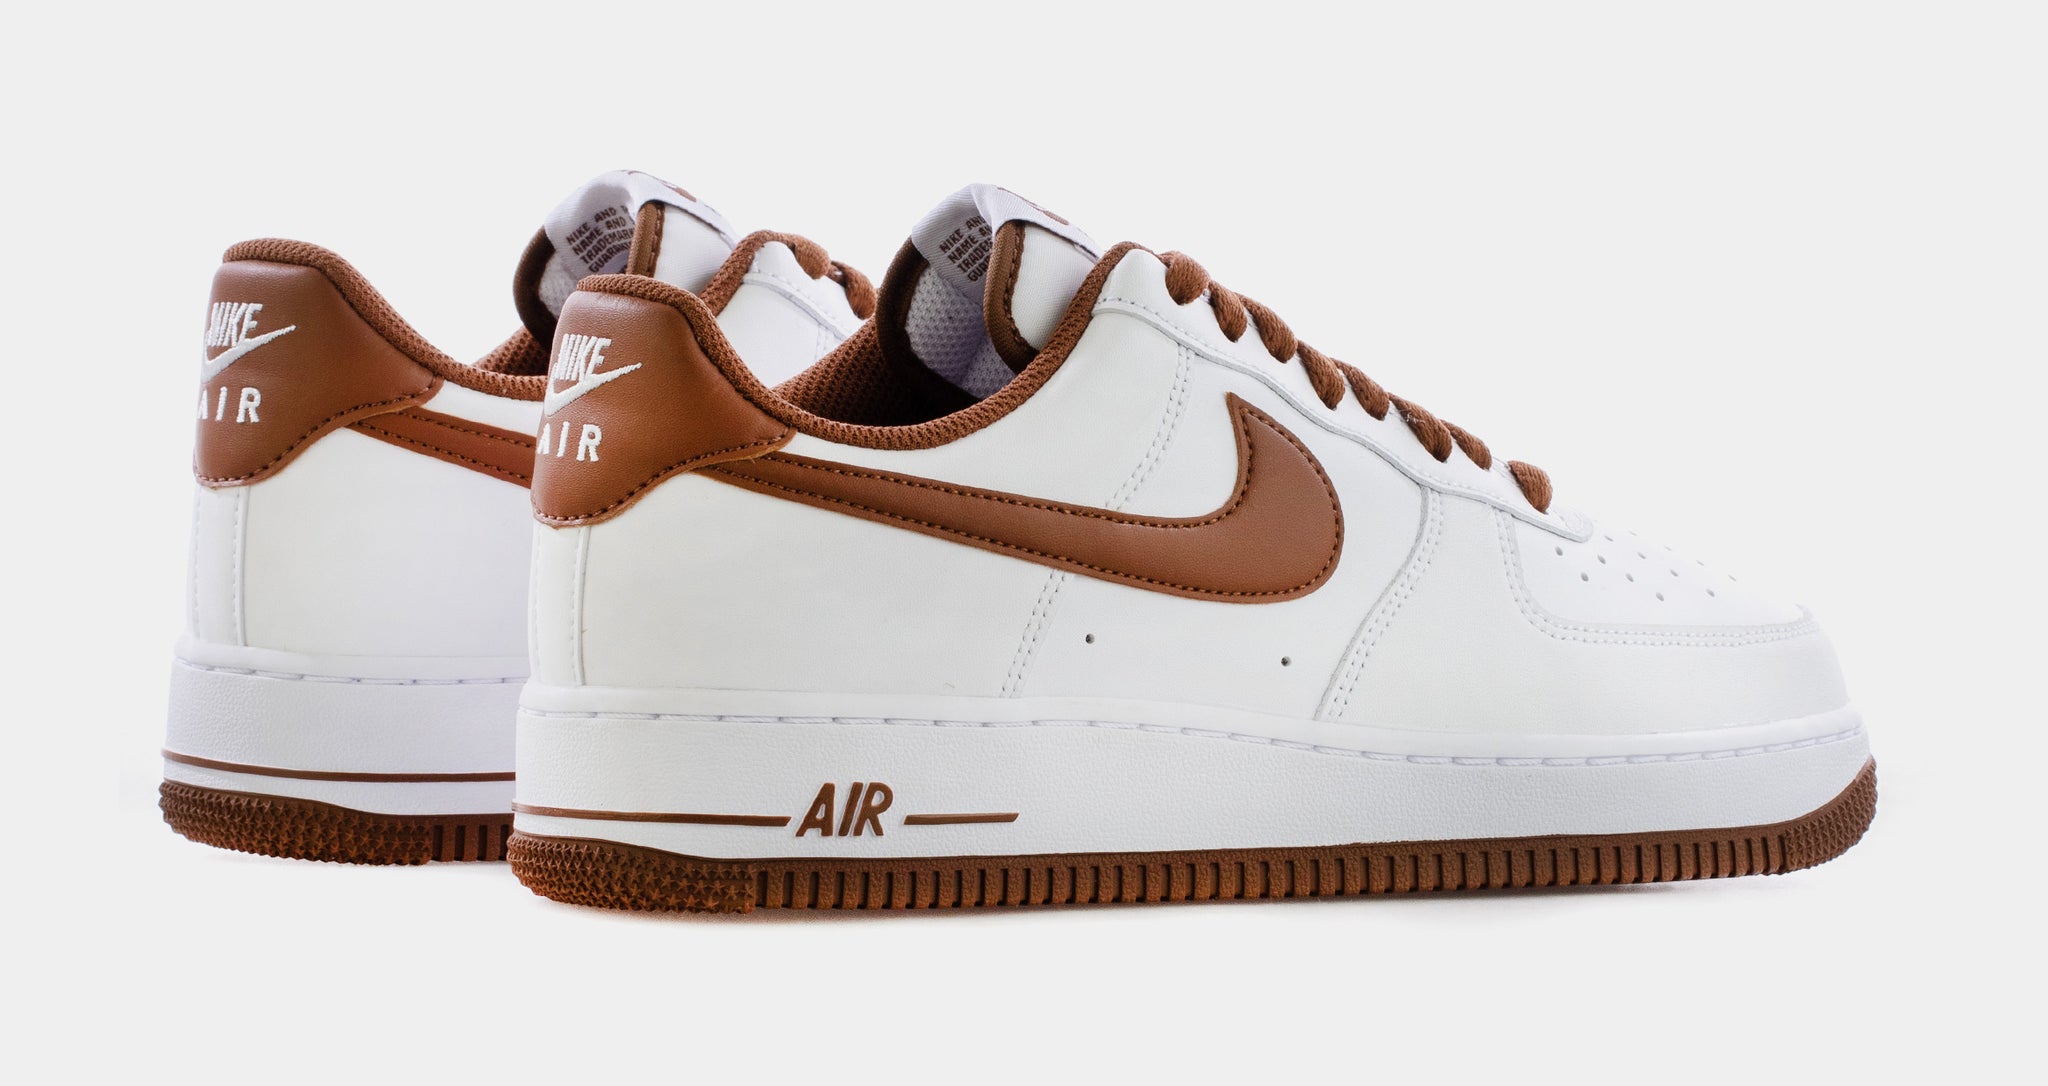 Air force 1 leather low trainers Nike Brown size 10 US in Leather - 30464889